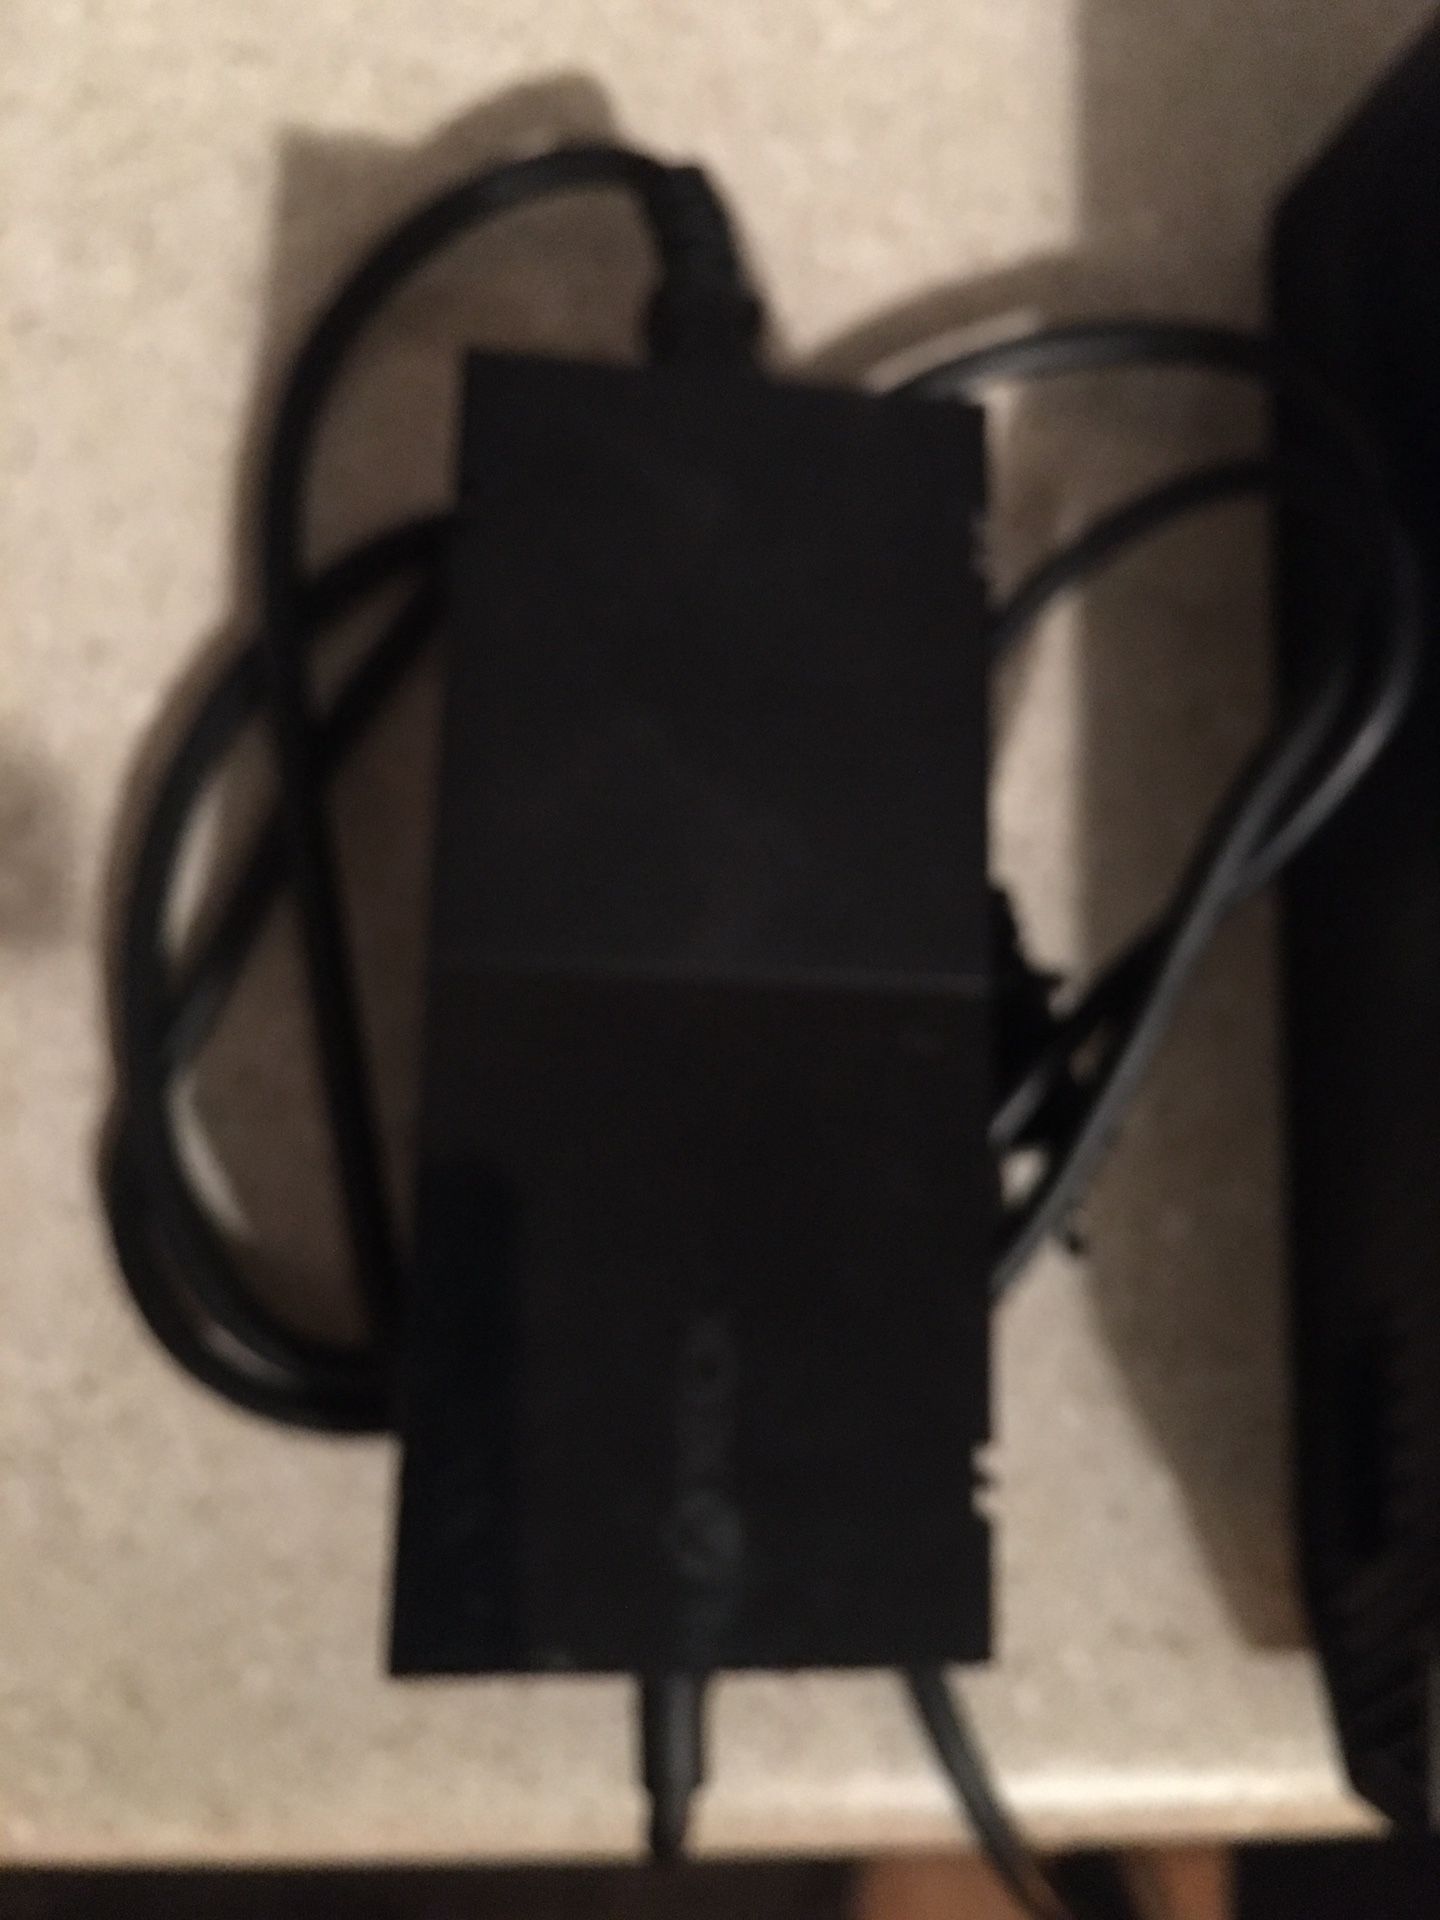 Xbox One Original With Remote and Power Cord